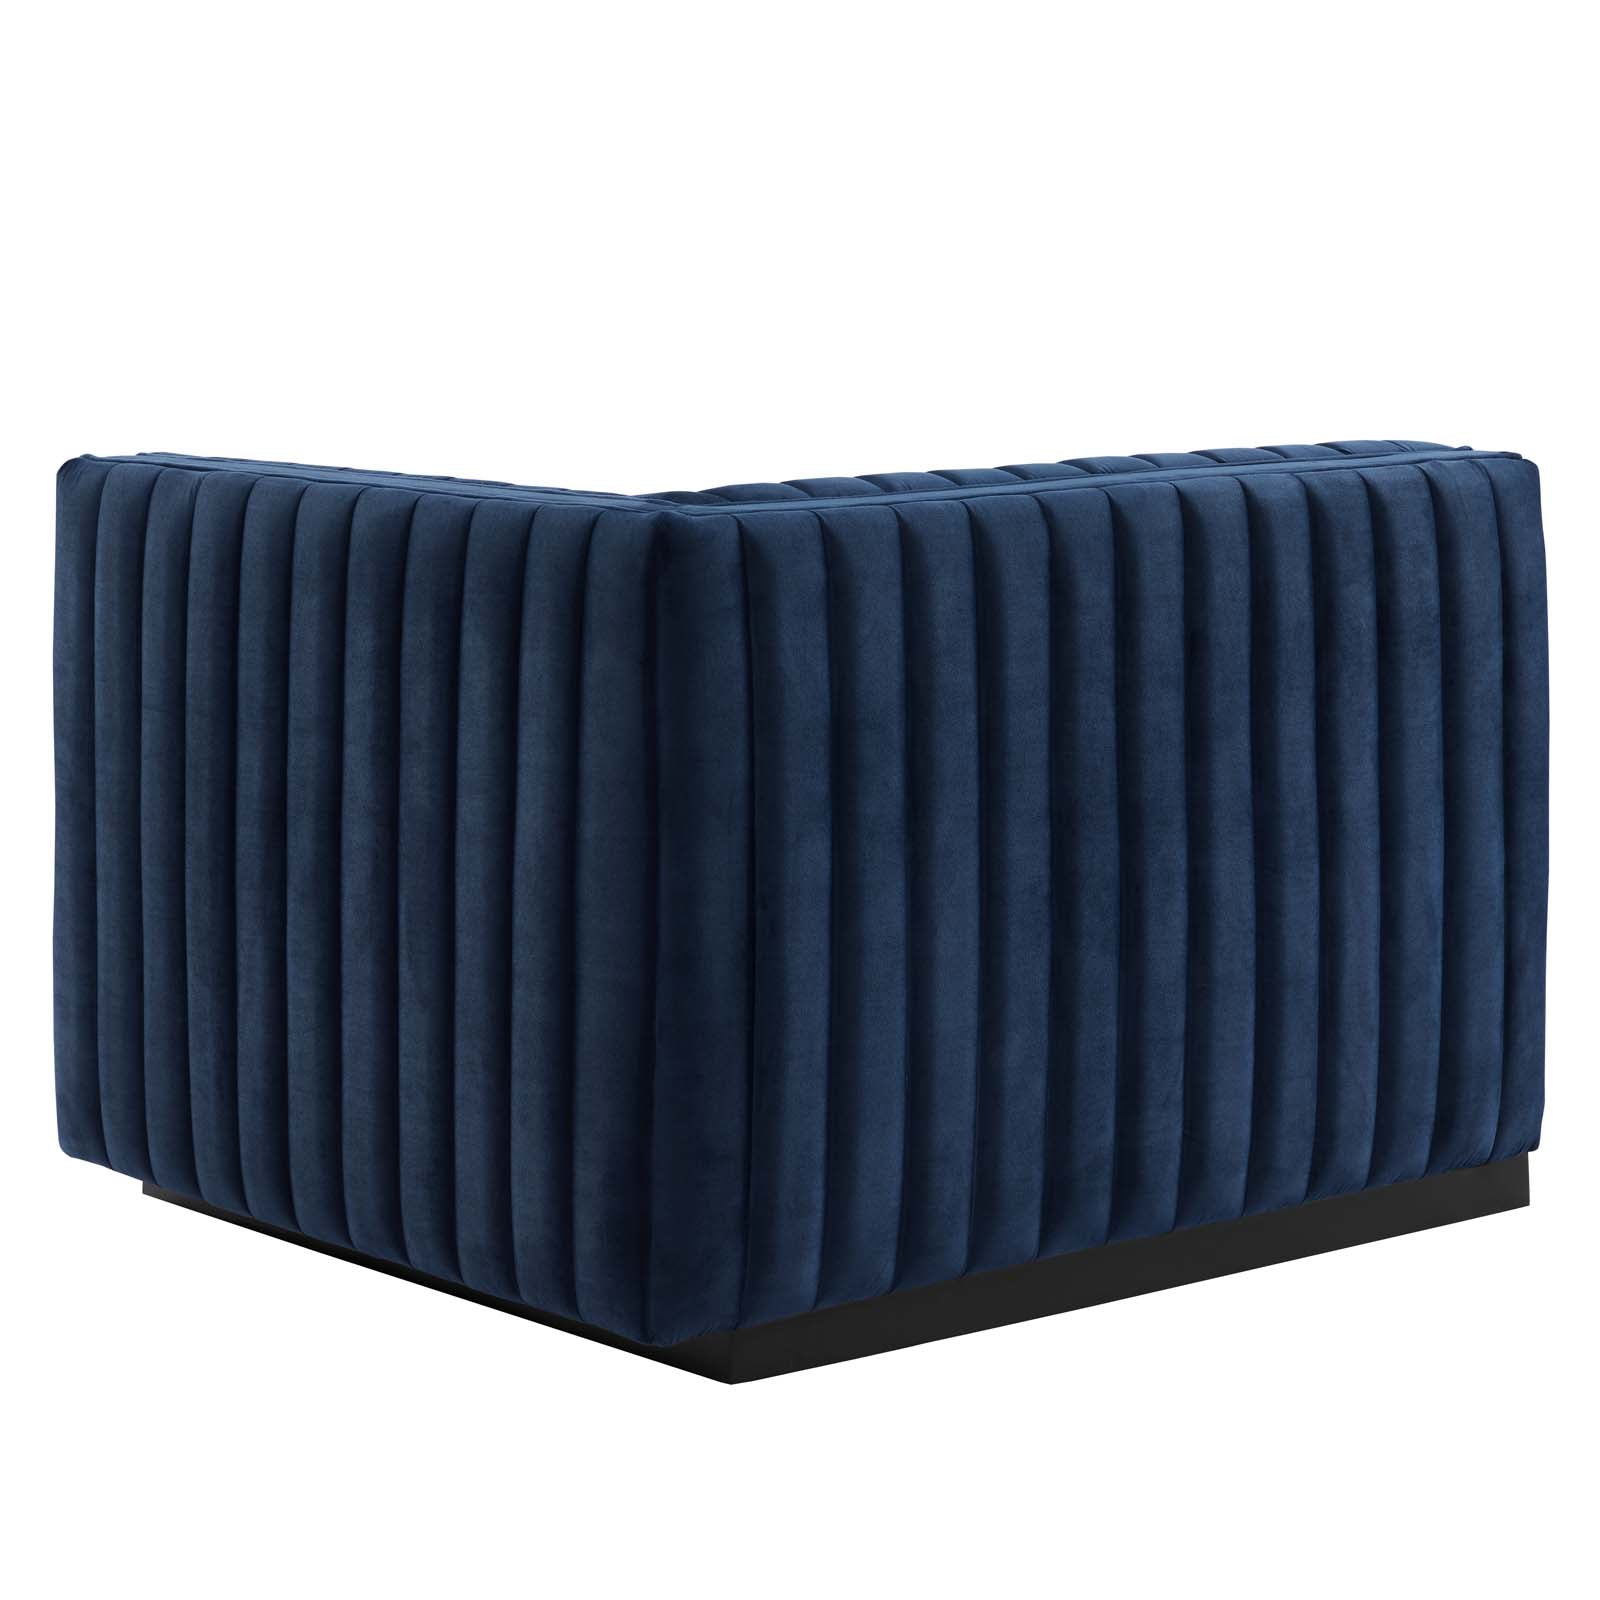 Modway Sectional Sofas - Conjure Channel Tufted 109" W Performance Velvet 5-Piece Sectional Black Midnight Blue